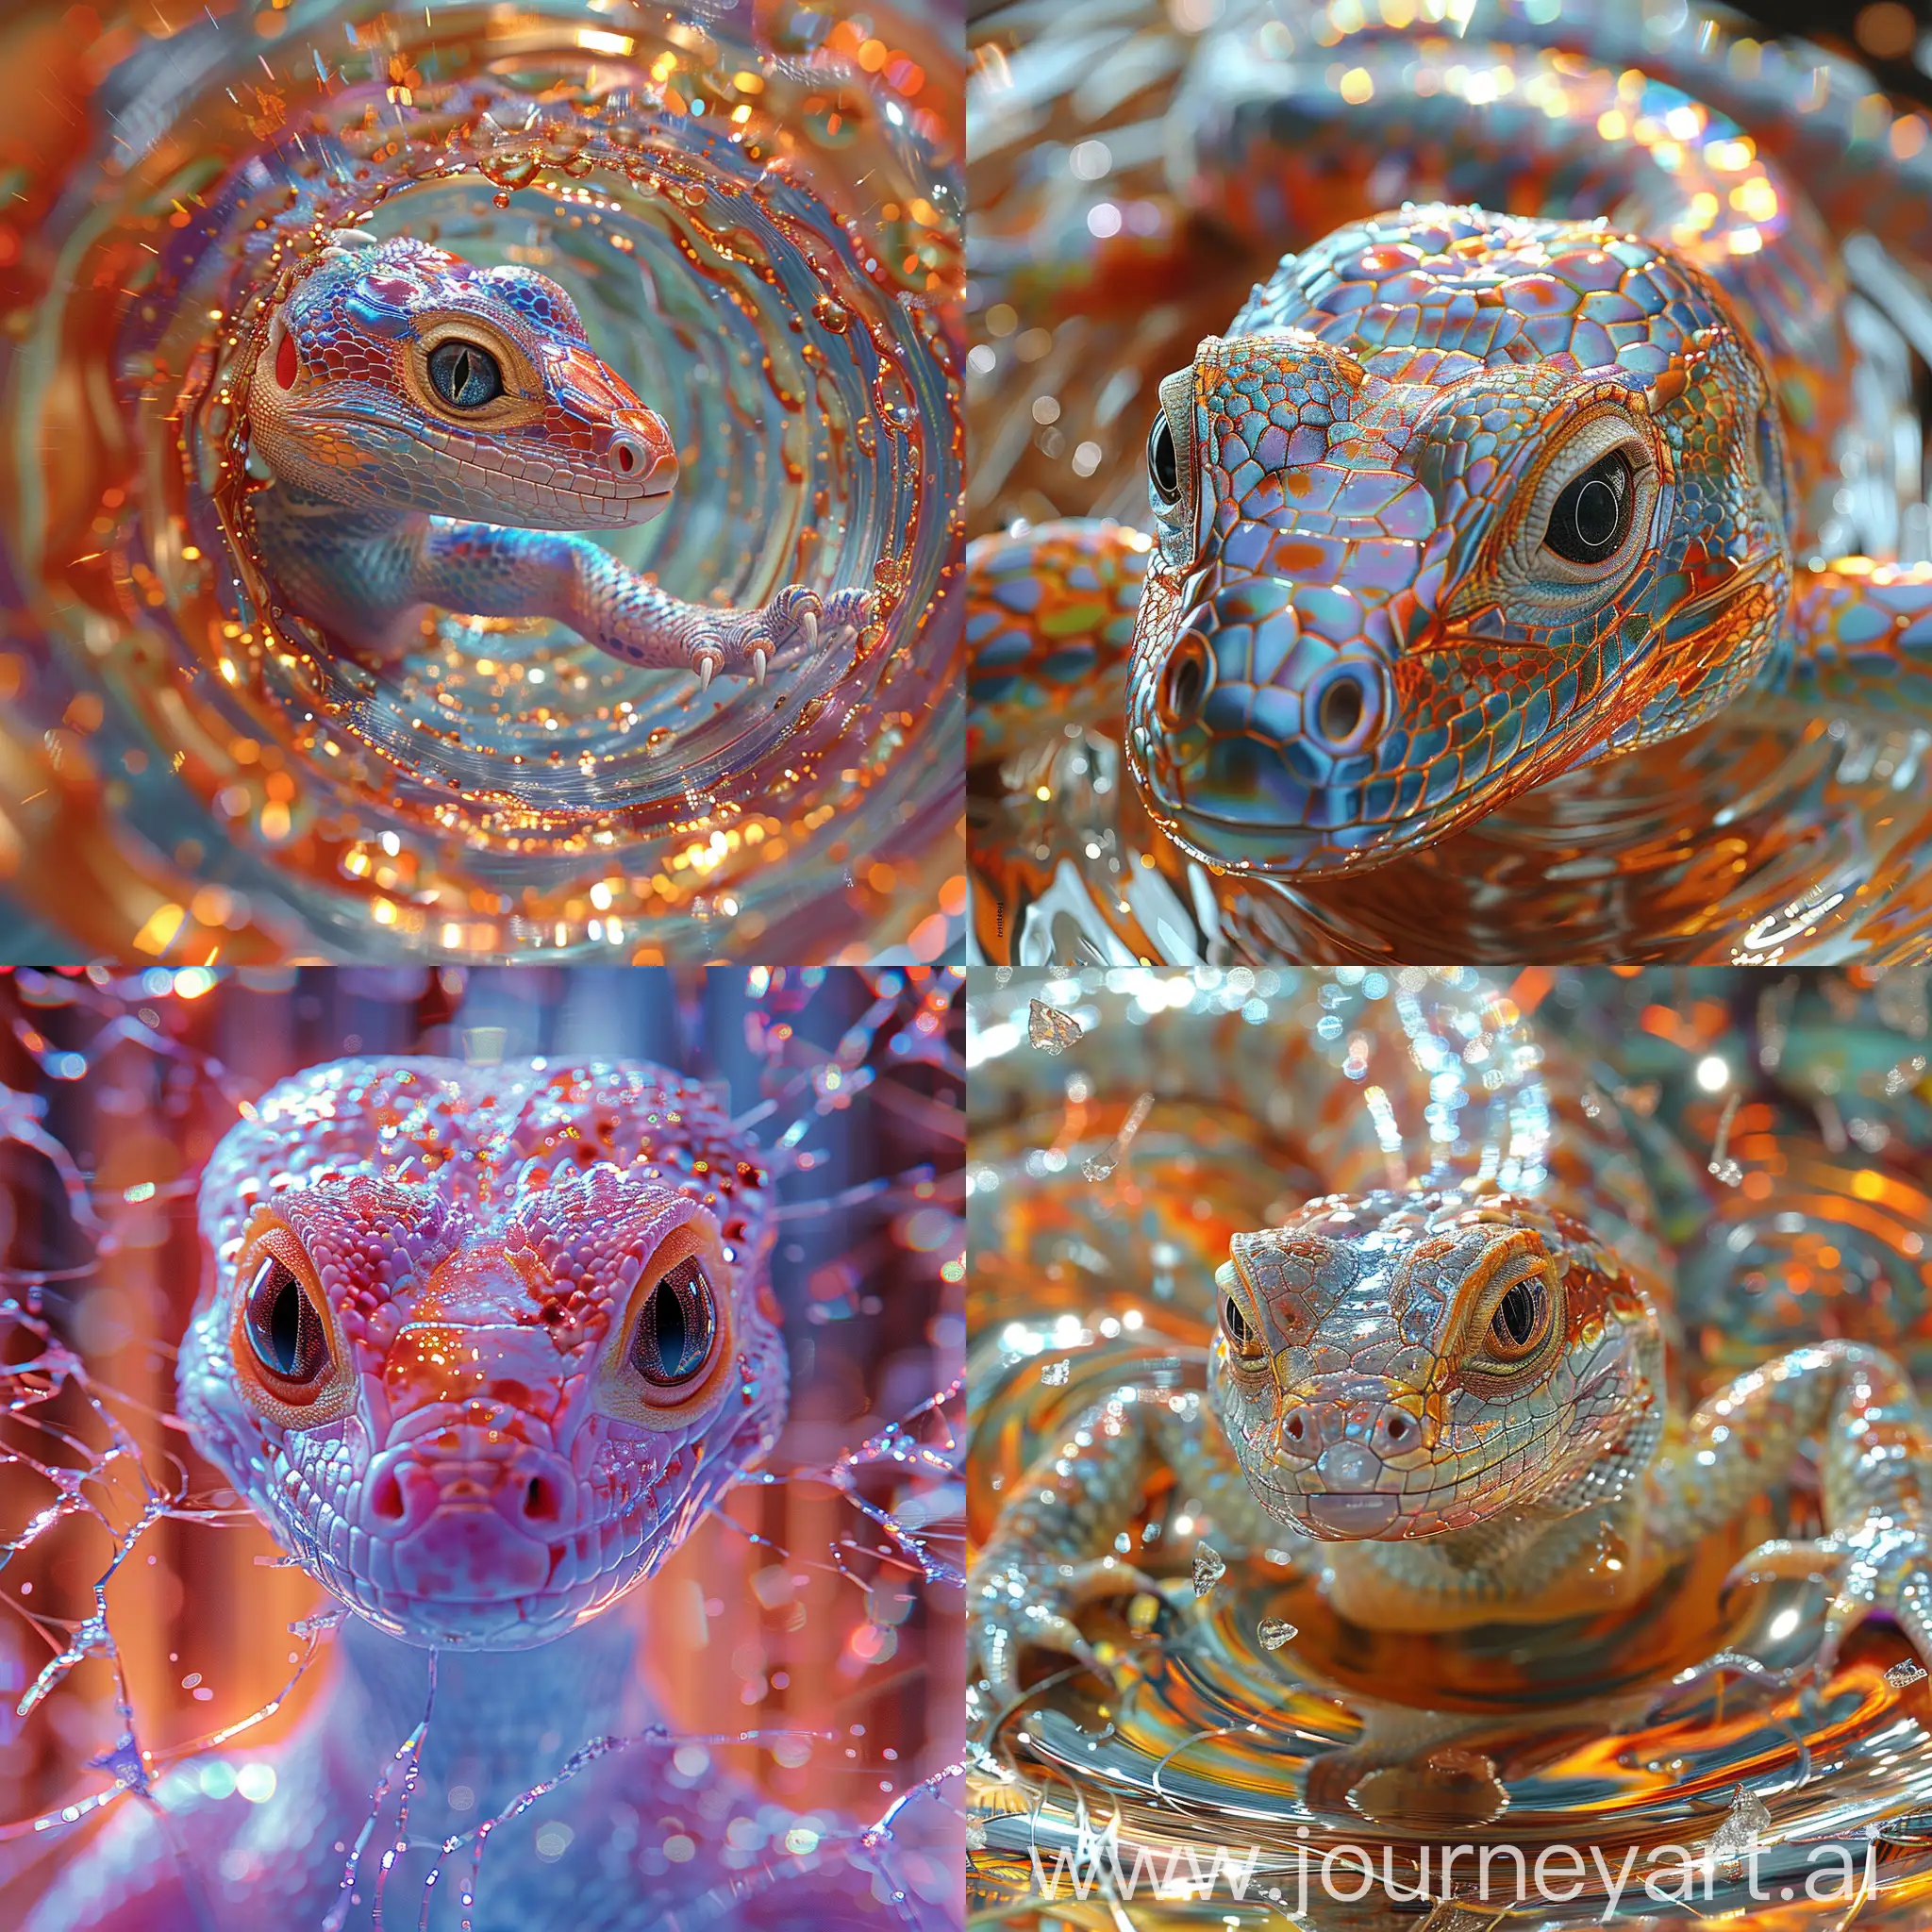 (Lizard) , Unconventional and Tropical, (copper theme) , FOV 90 degrees, surreal, Muted Colors, award winning, photorealism, alien, blacklight photography as a street fighter character, Shattered glass reflecting vibrant hues, dances in an ethereal swirl --stylize 750 --v 6